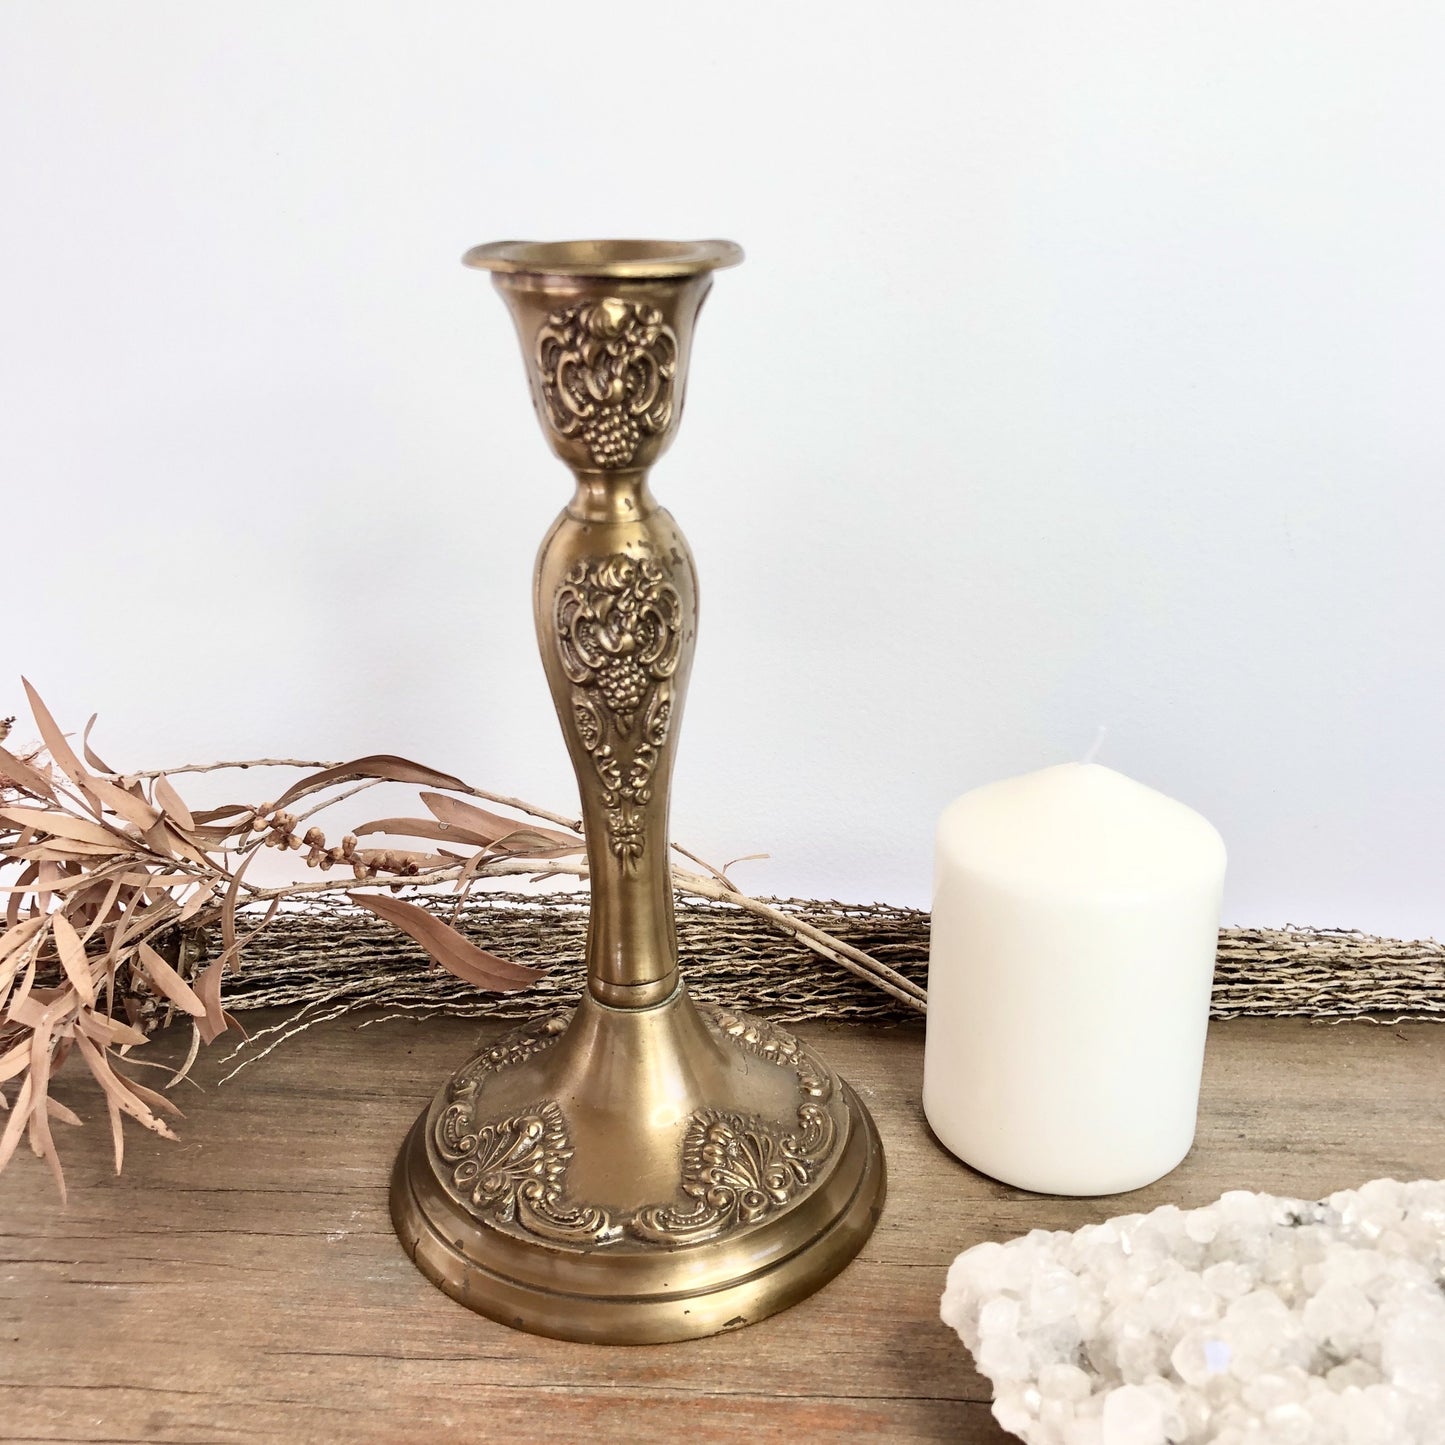 Antique brass candle holder